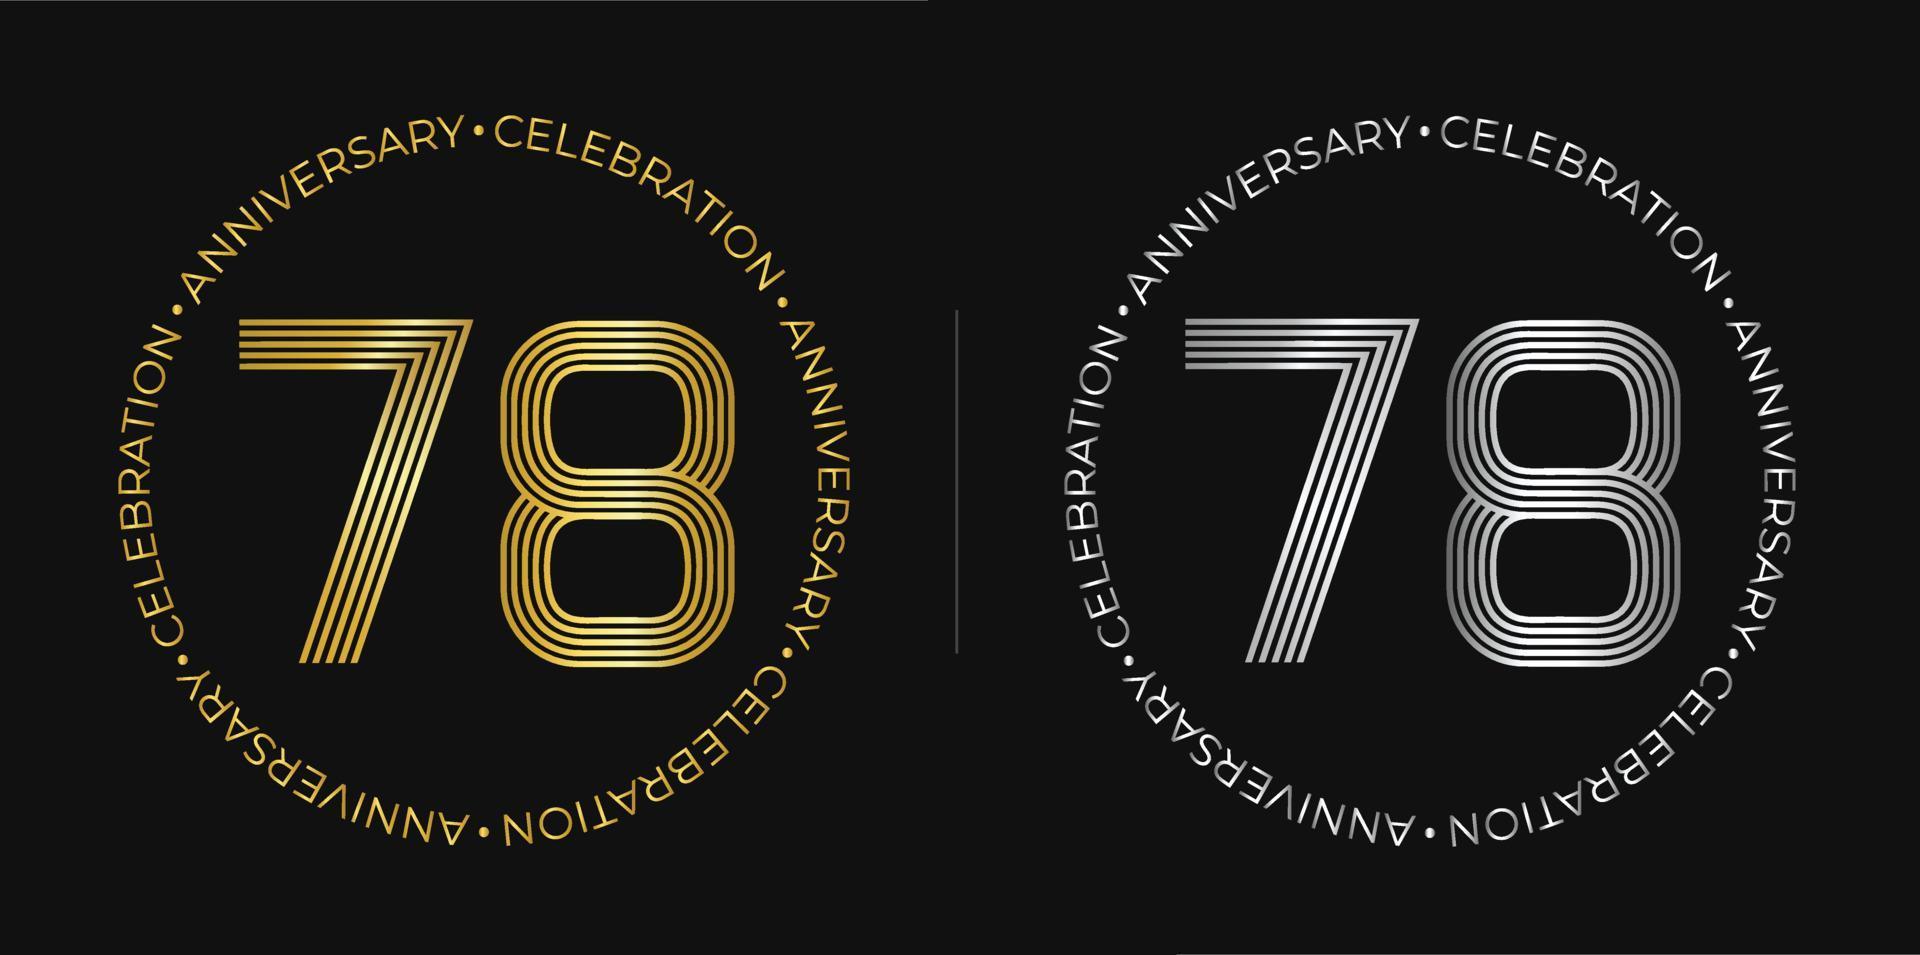 78th birthday. Seventy-eight years anniversary celebration banner in golden and silver colors. Circular logo with original numbers design in elegant lines. vector